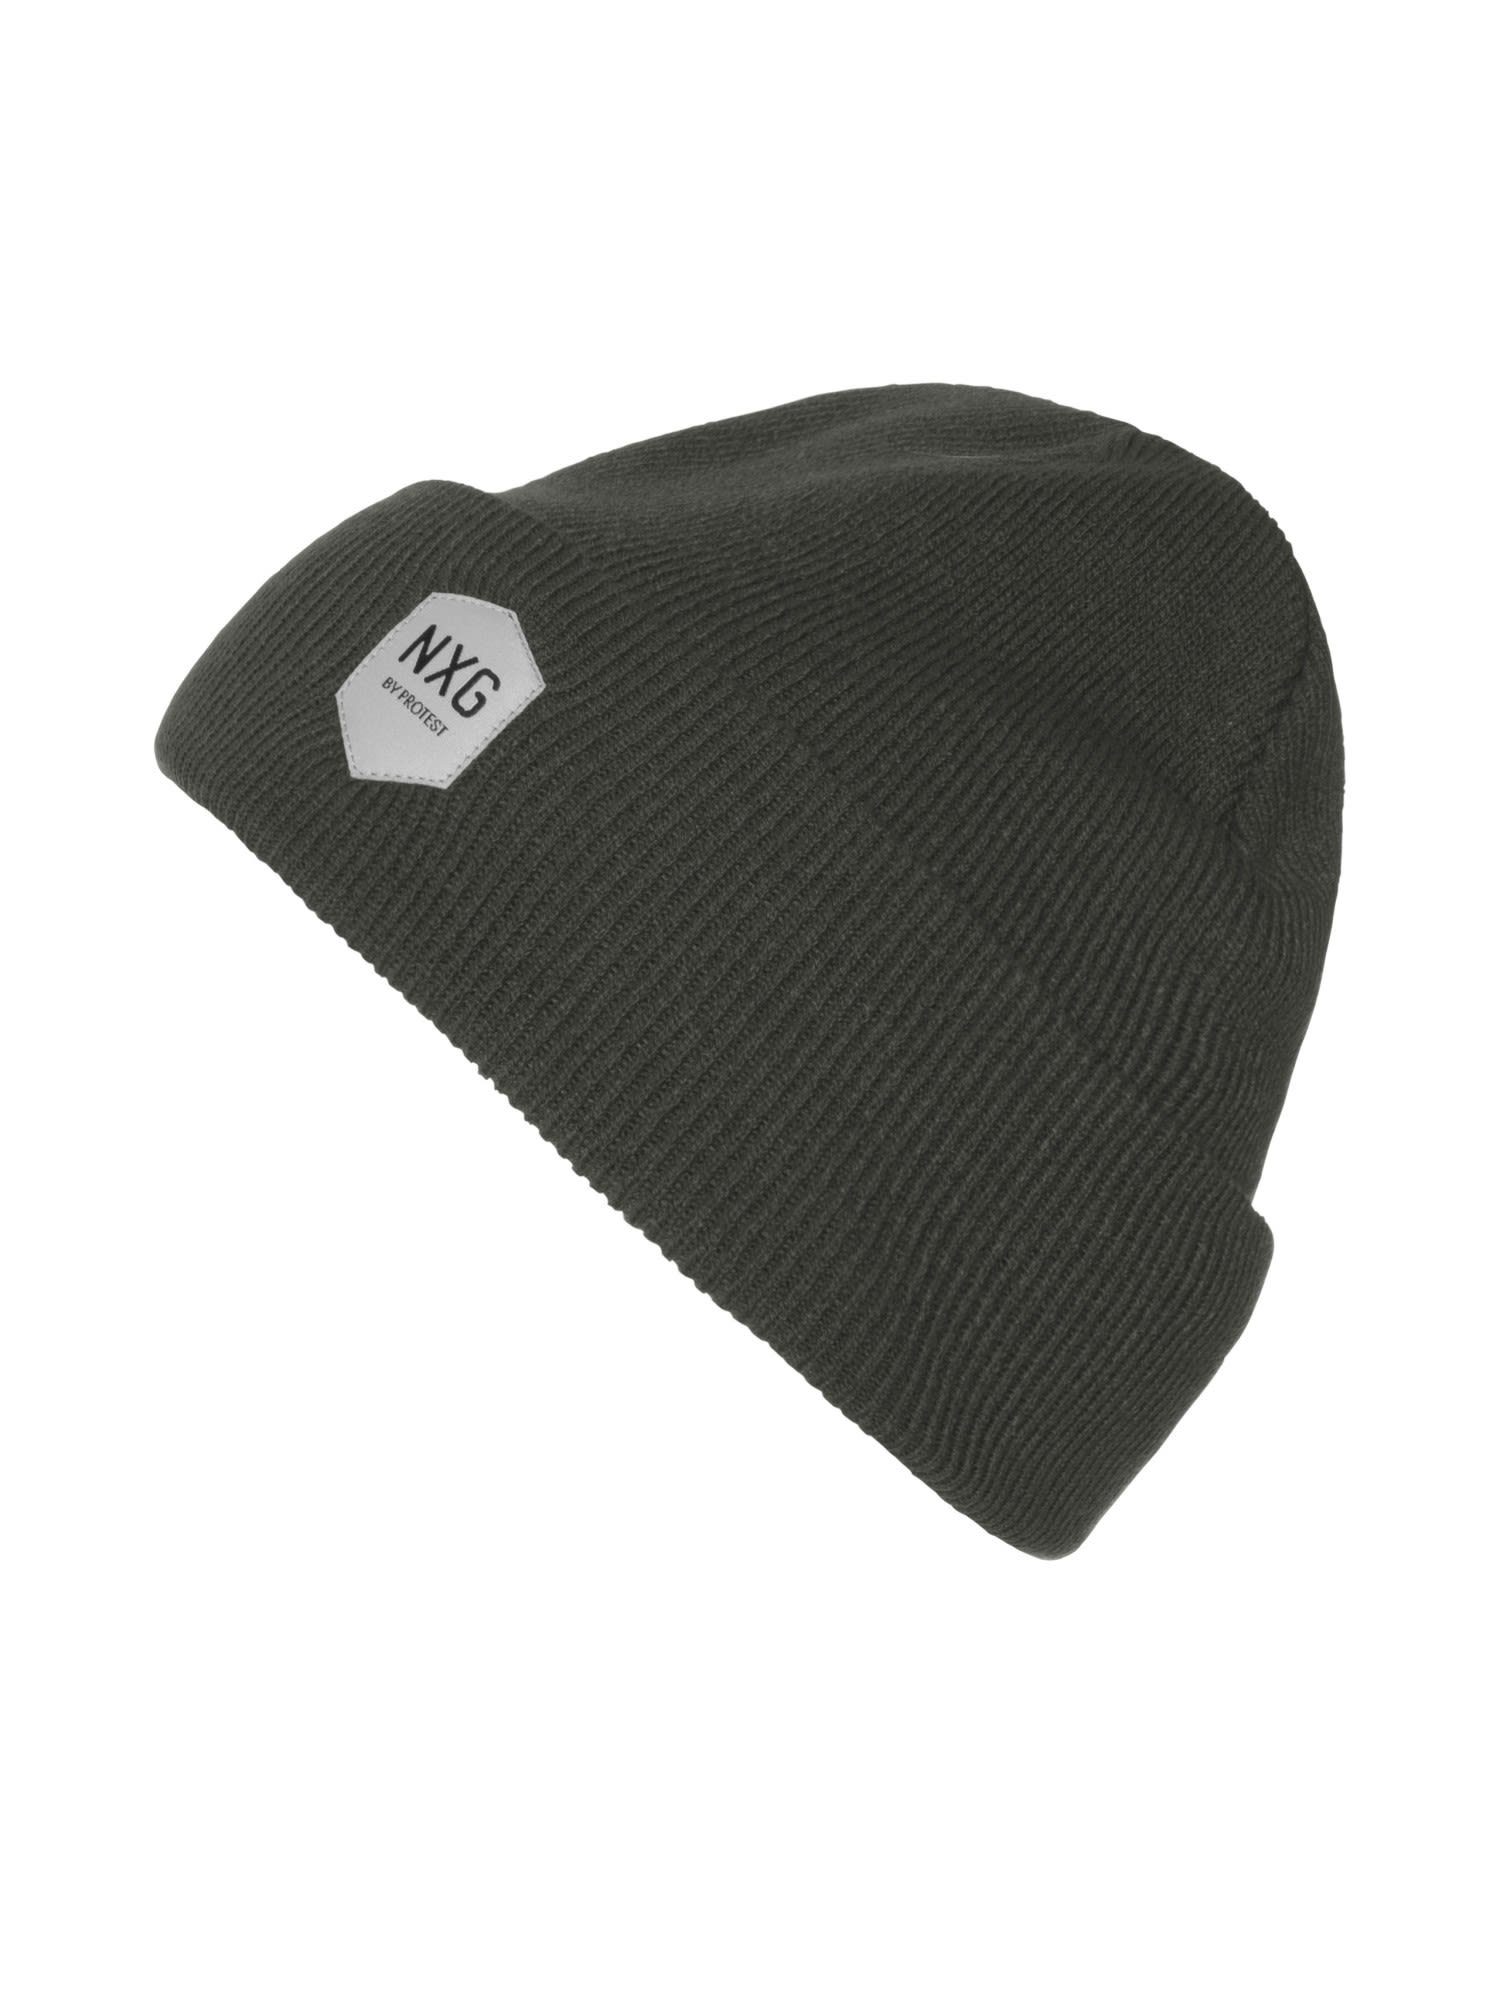 Protest Beanie Protest Nxg Rebelly Beanie Accessoires Hunter Green